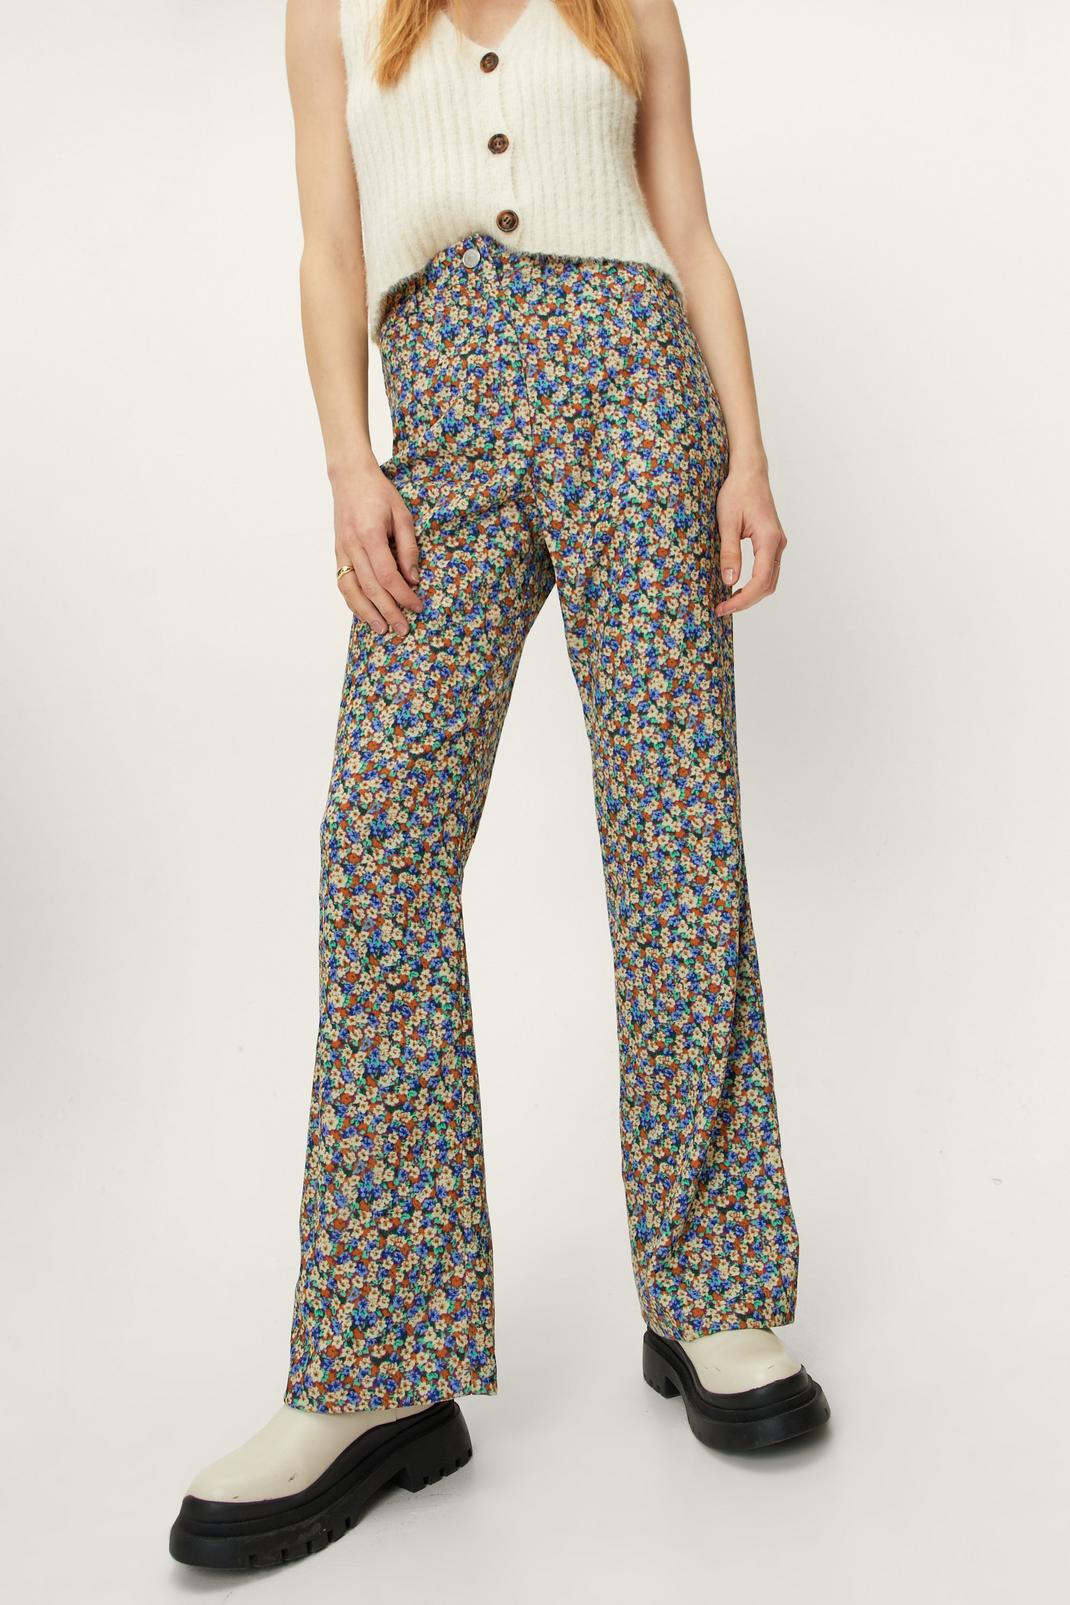 Patterned twill trousers - Cream/Butterflies - Ladies